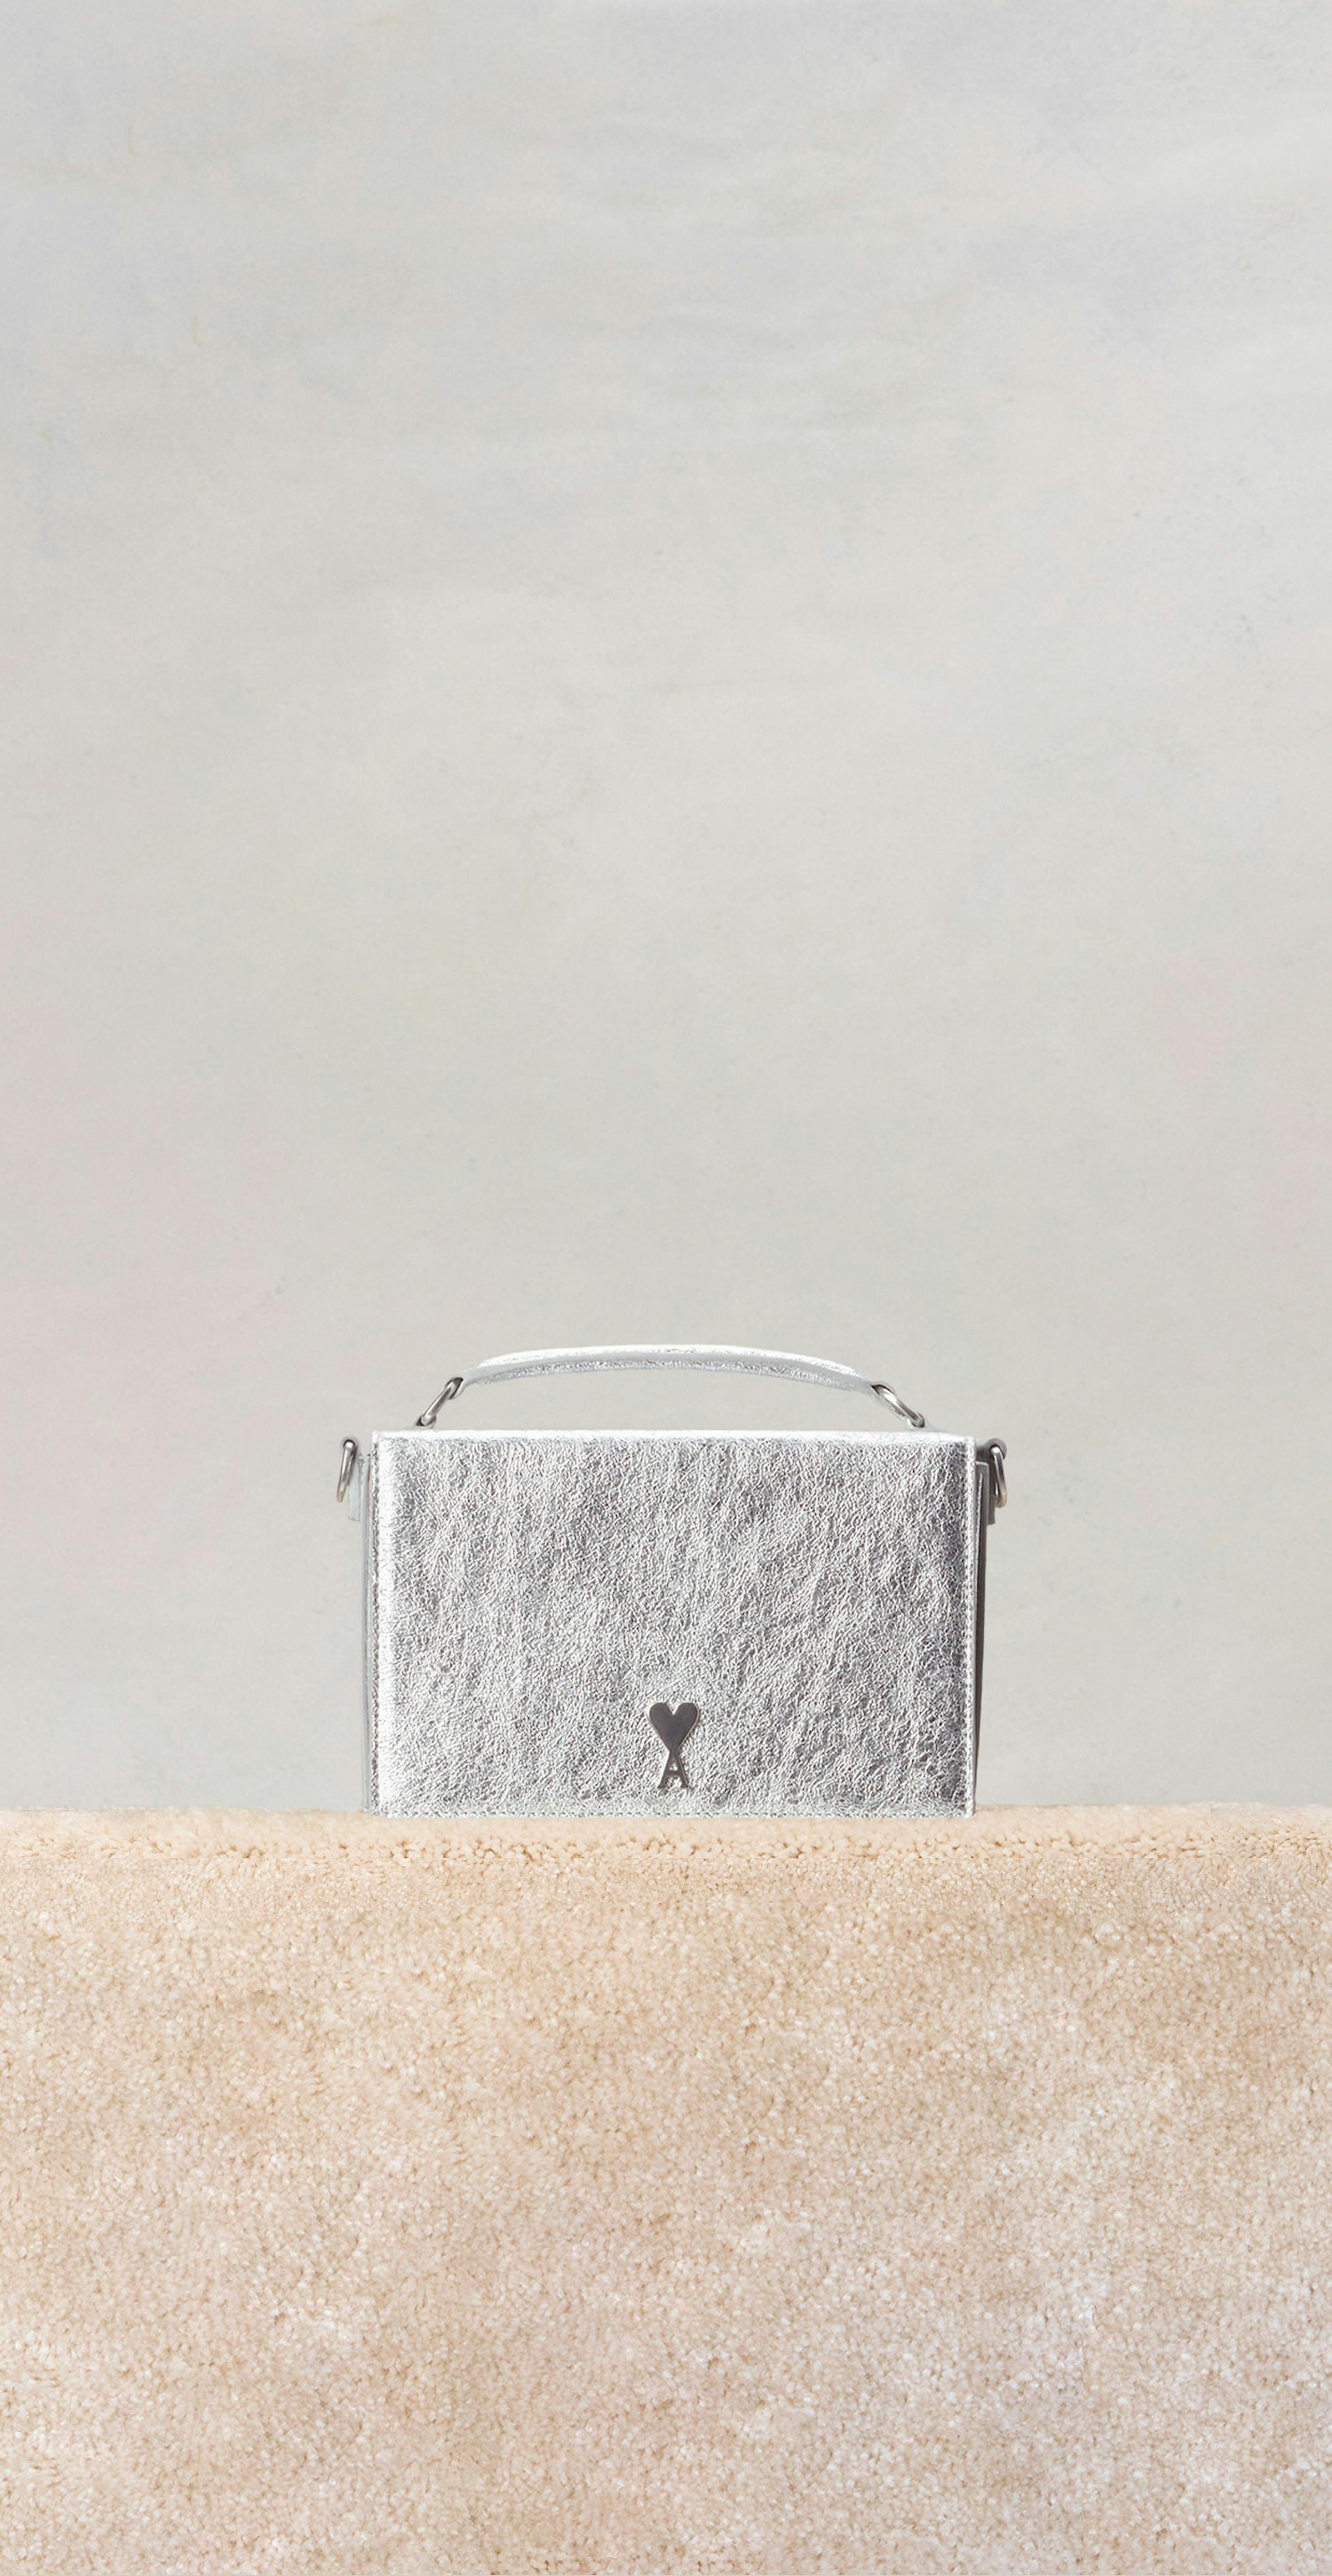 ADC LUNCH BOX BAG - 900 ARGENT